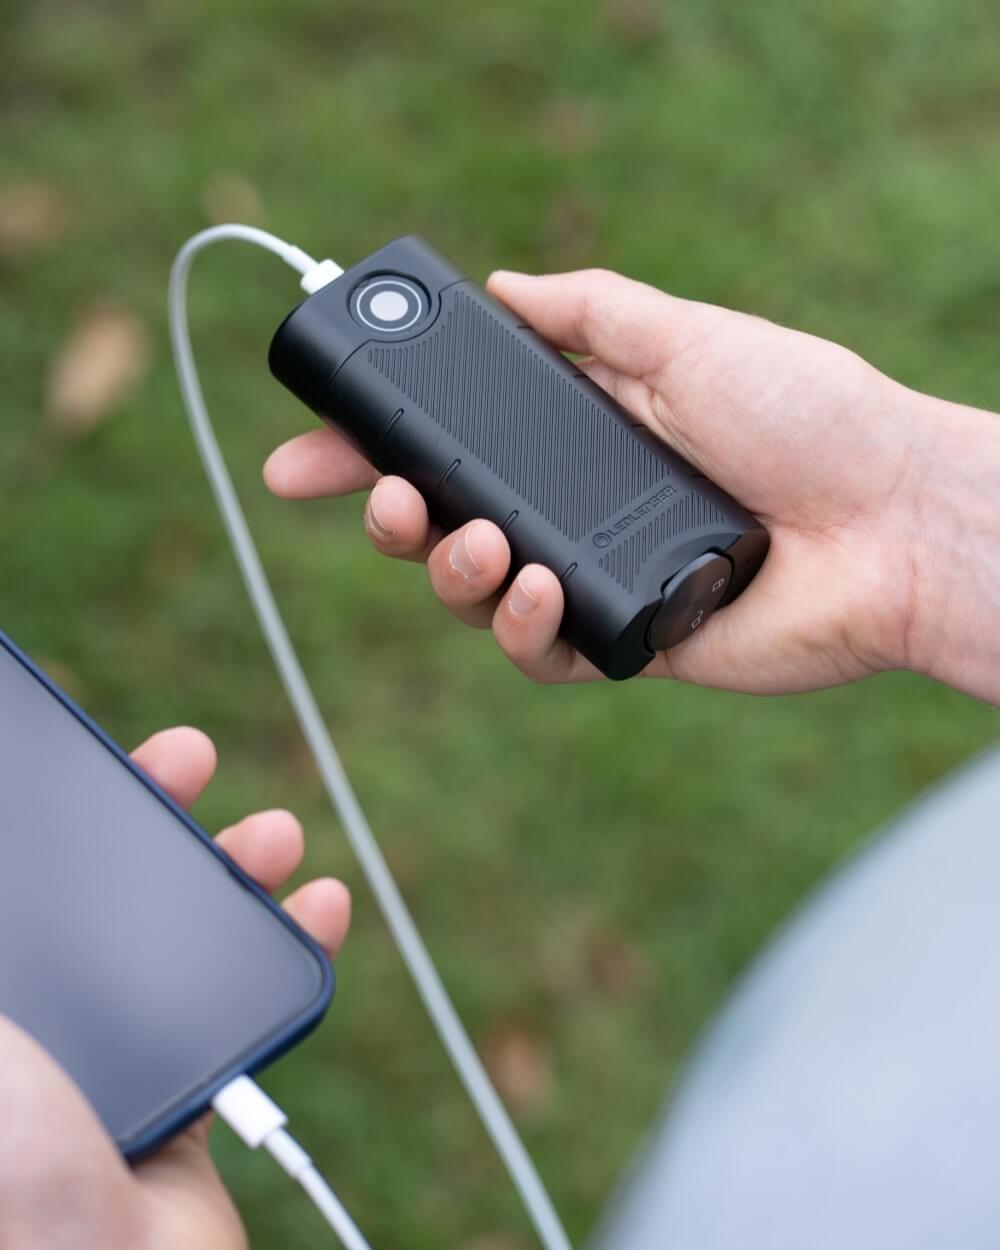 A smartphone is charging by a power bank